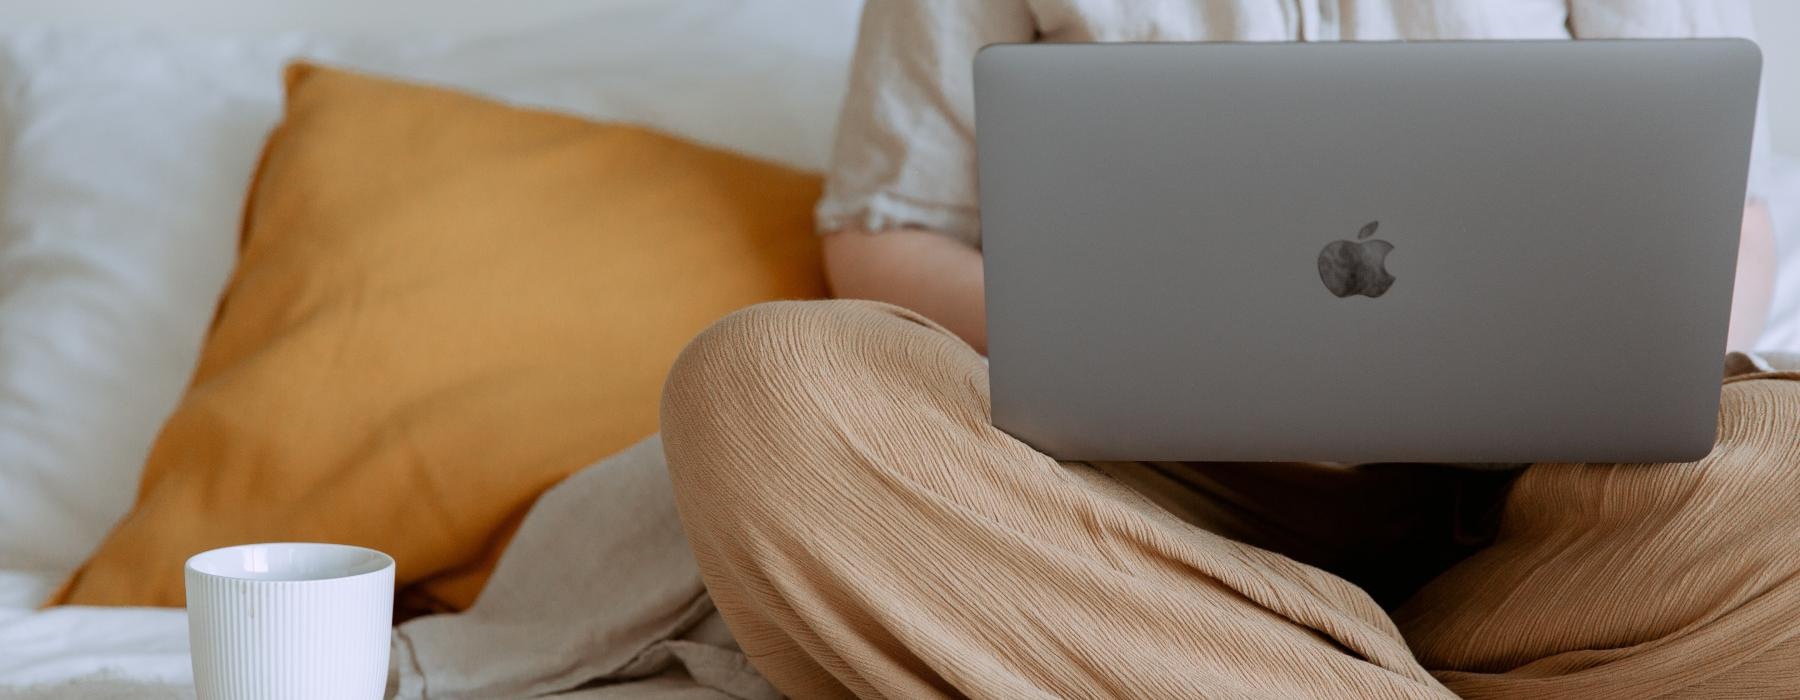 a person with a laptop on a bed